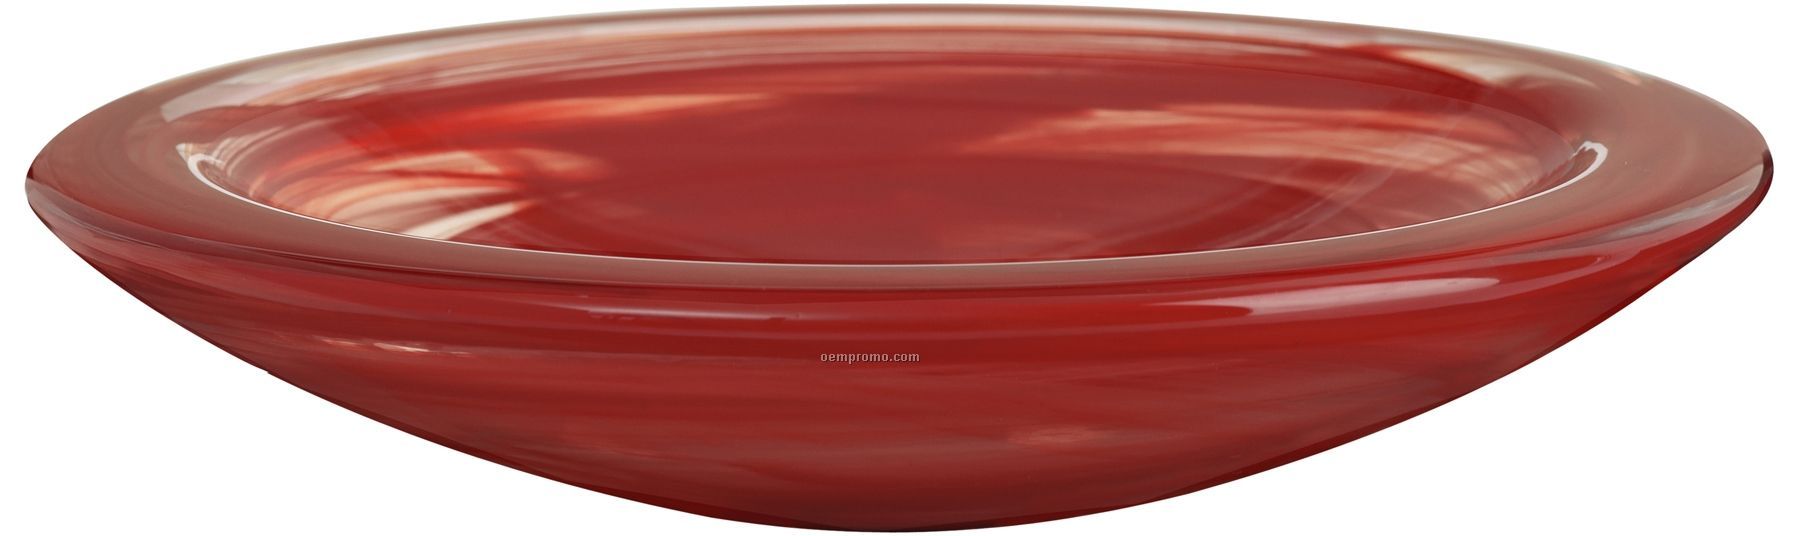 Atoll Marble Look Dish By Anna Ehrner (Red)